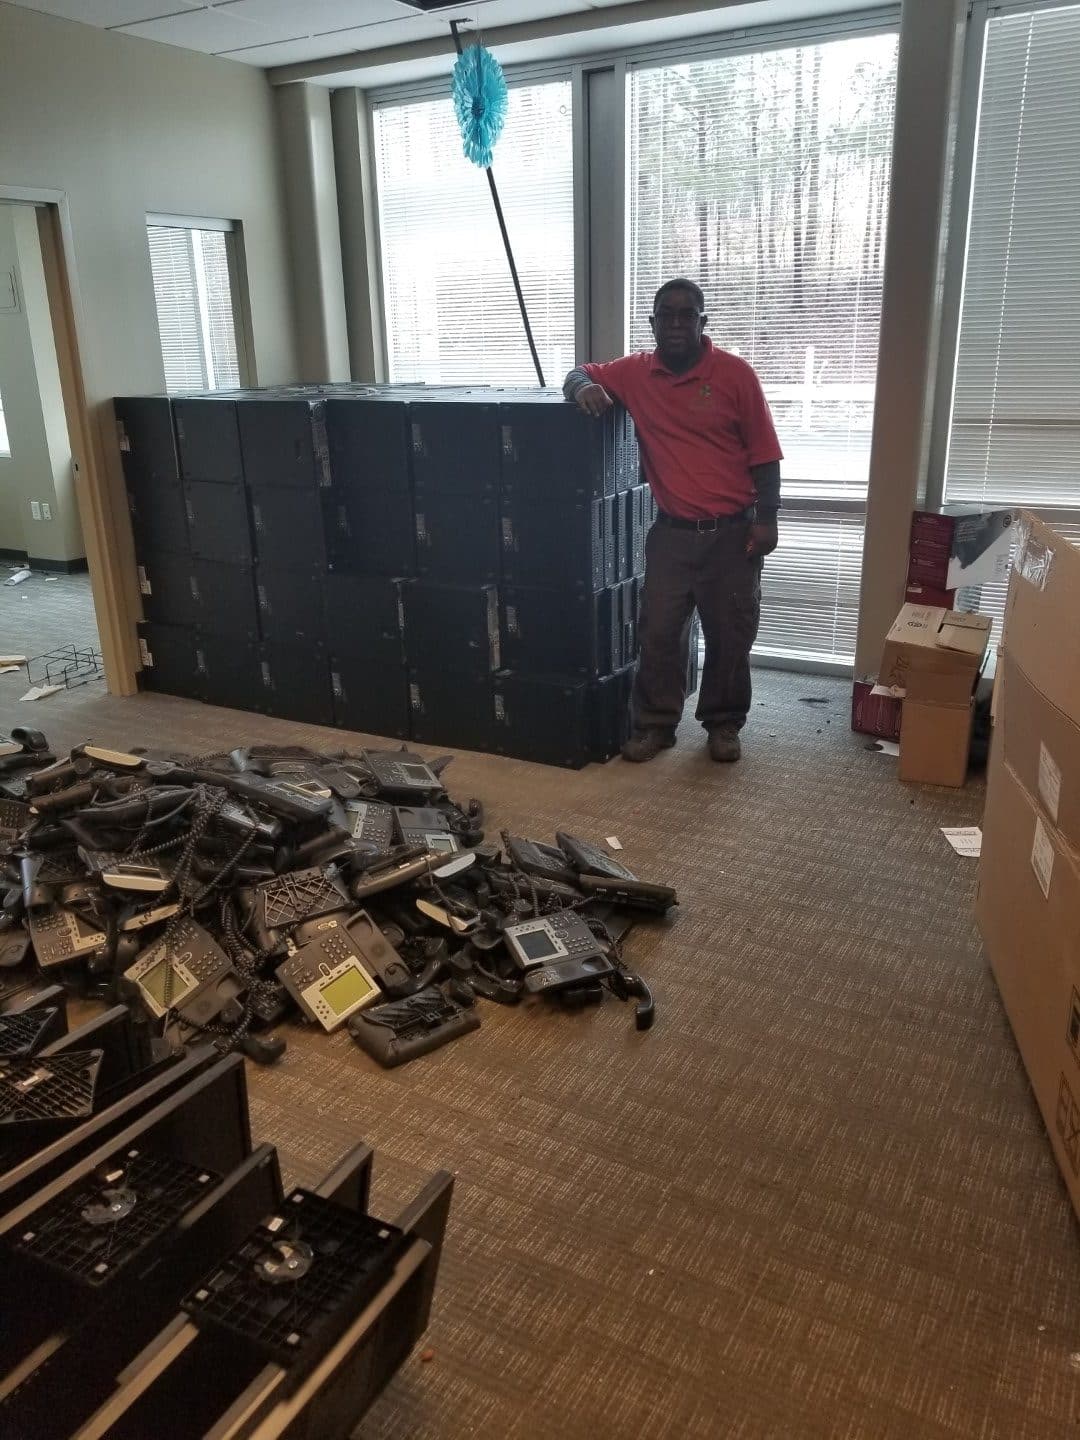 Atlanta IT Asset Disposal ITAD Electronics Recycling Services - Call Or Schedule Online